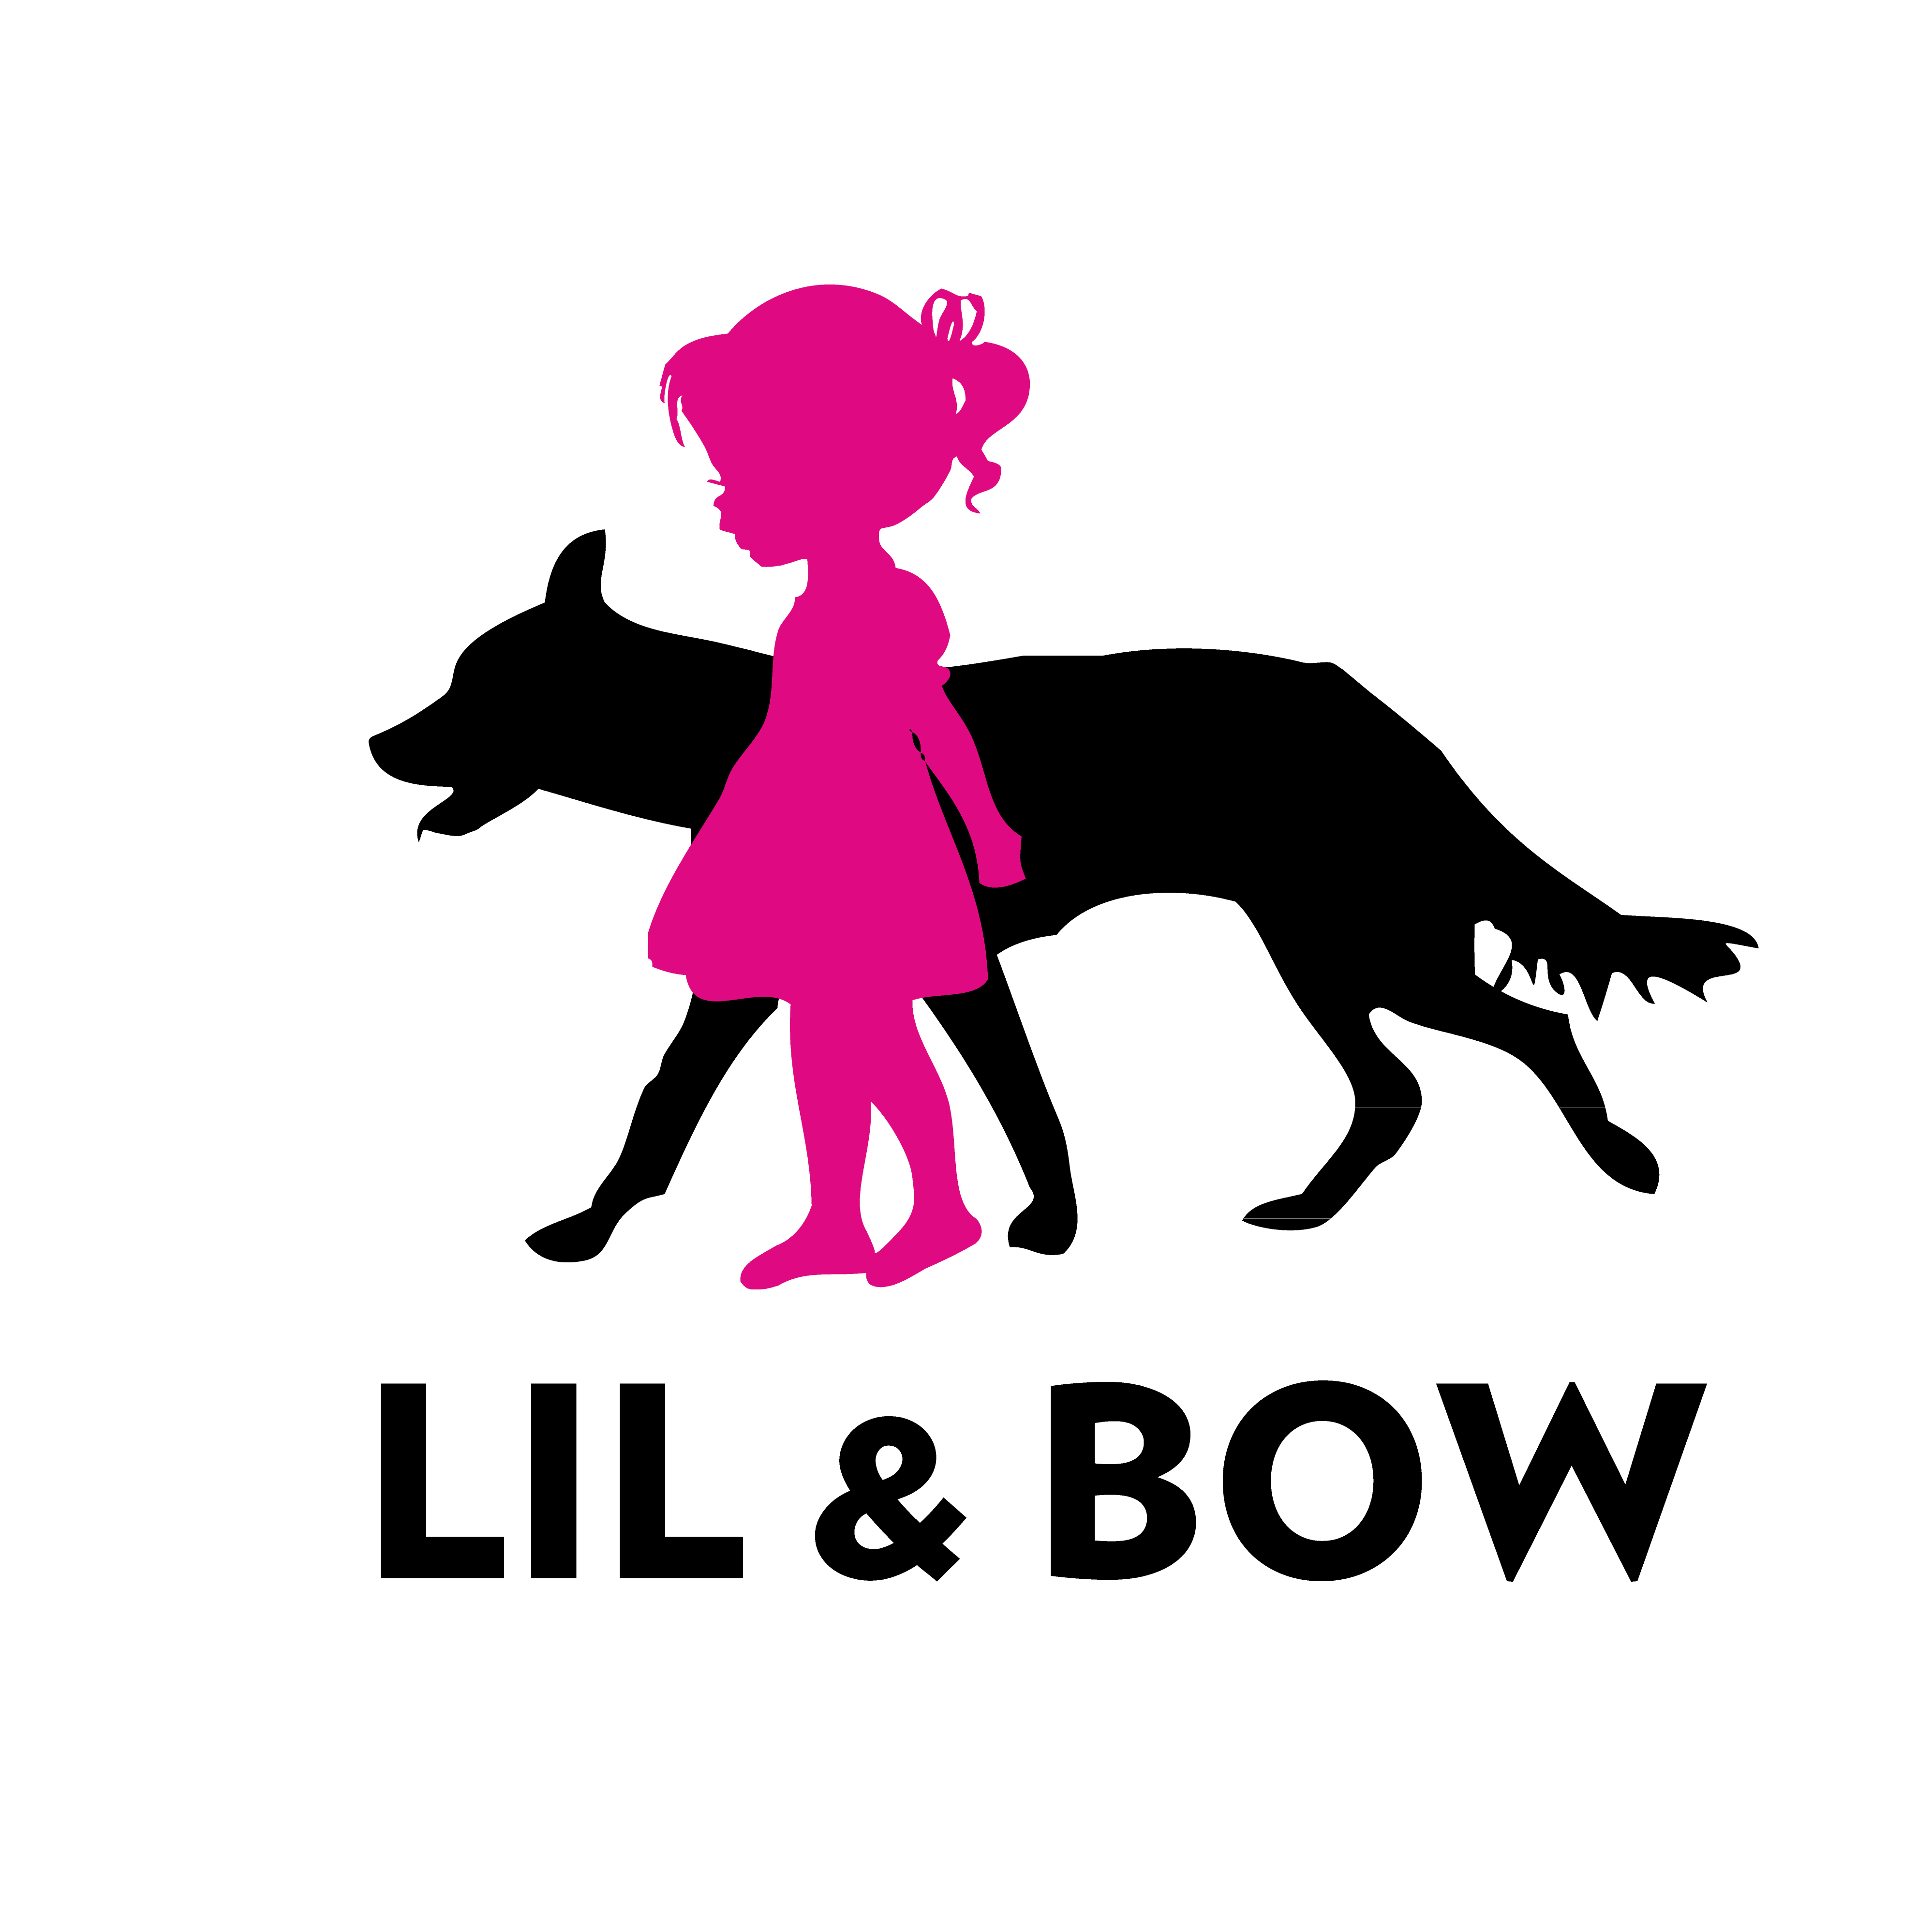 LIL & BOW